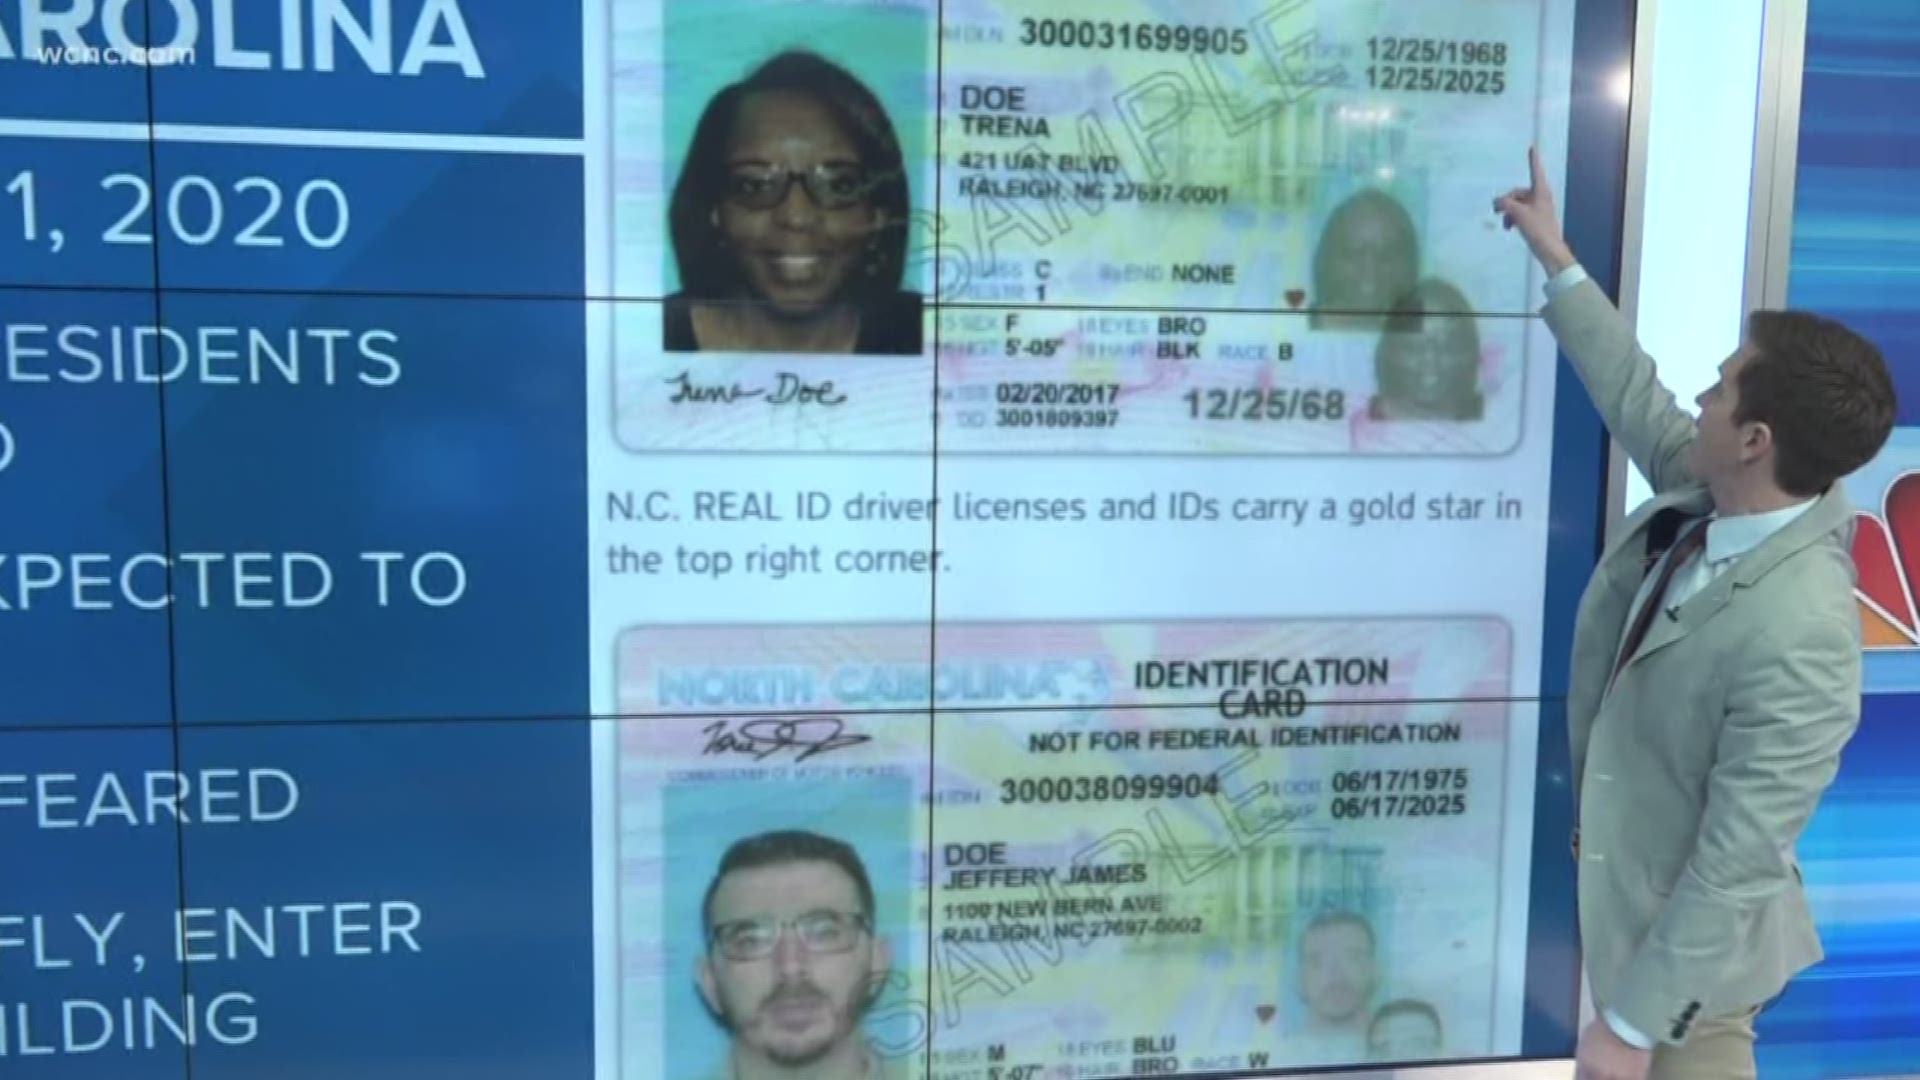 Officials say South Carolina drivers shouldn't wait to get the new ID even though the deadline is nearly two years away.